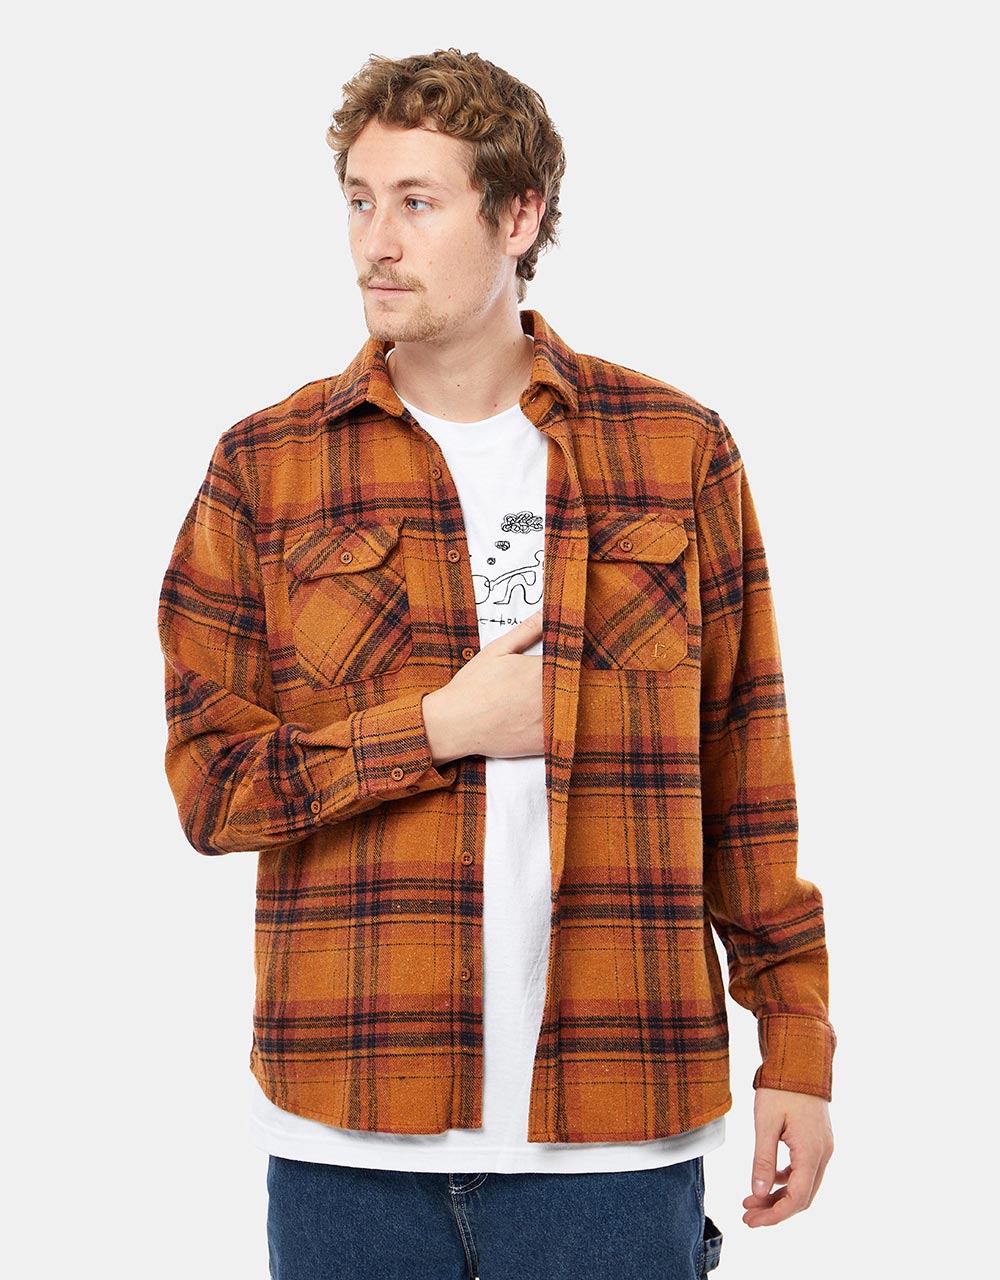 Route One Logan Flannel Shirt - Ginger